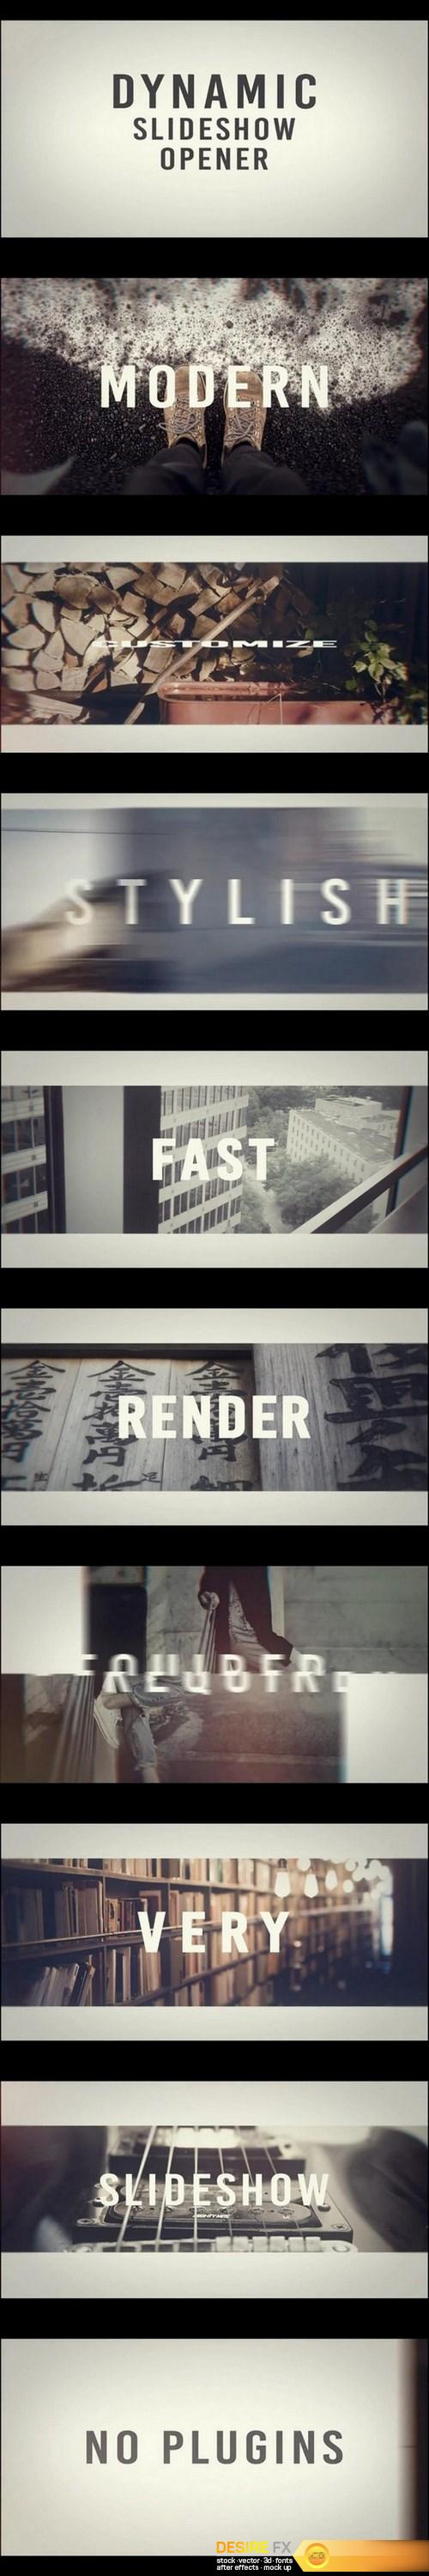 Motion Array – Dynamic Slideshow Opener After Effects Templates